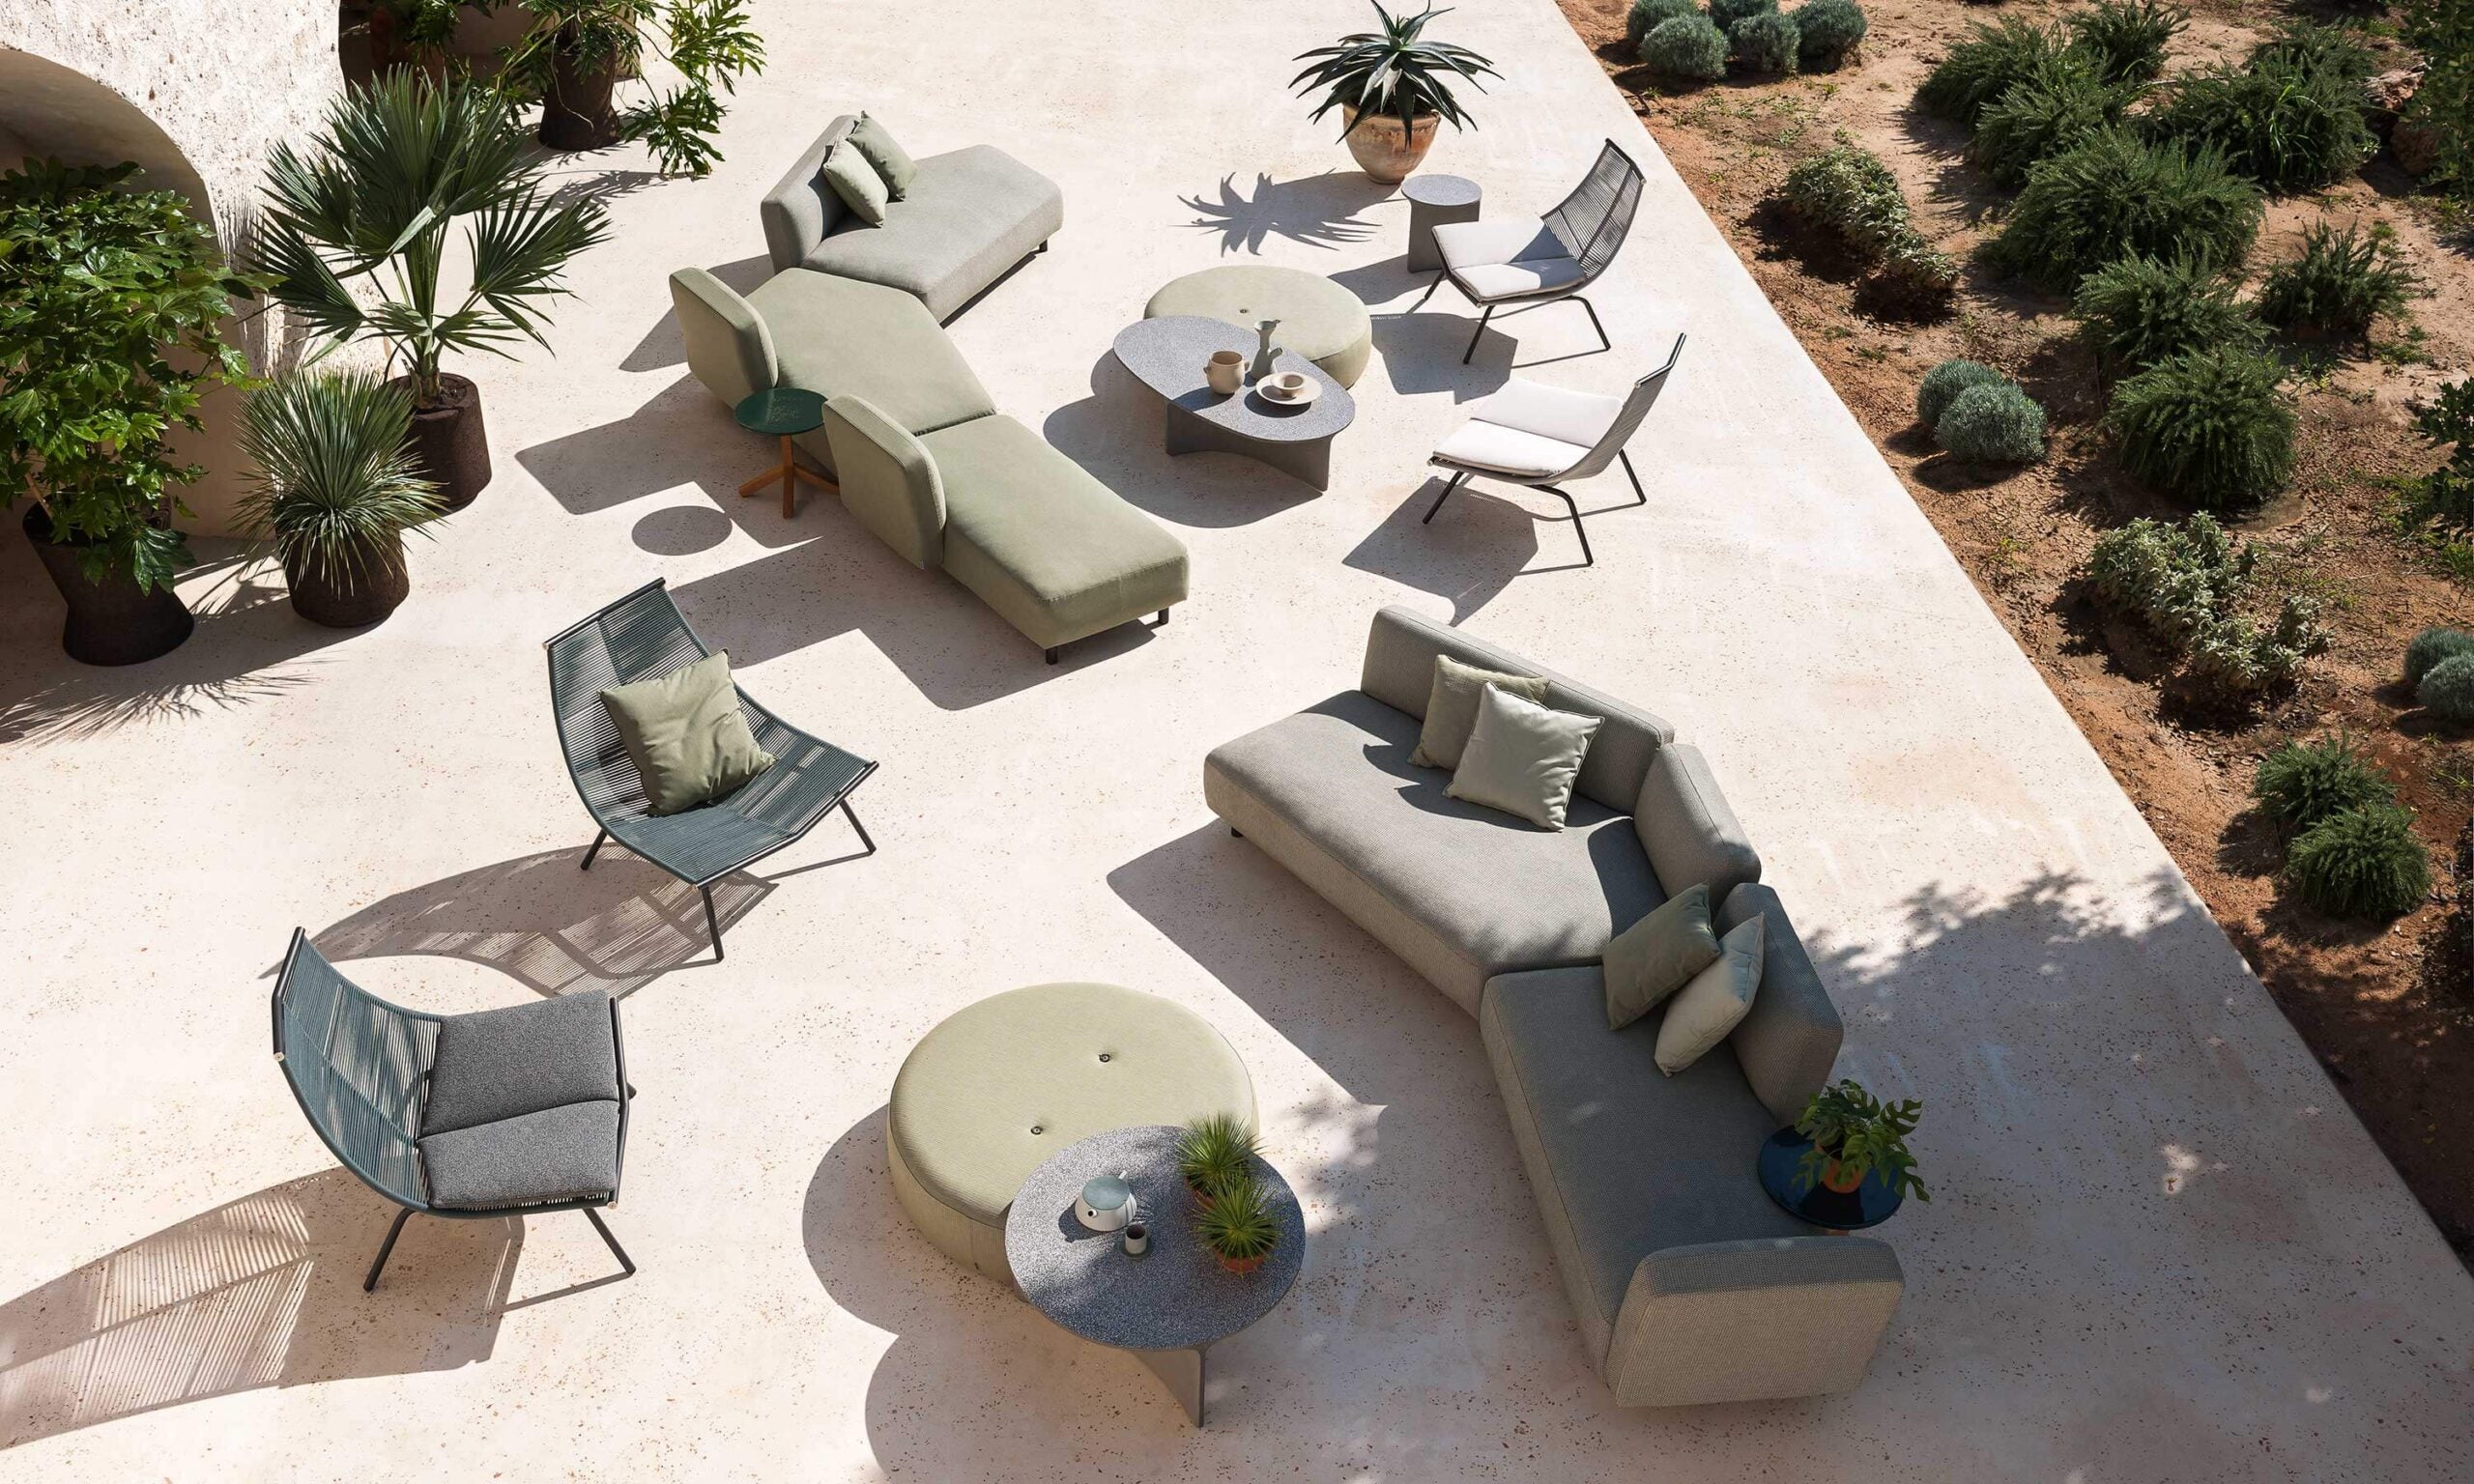 Durability and Sustainable Practices Are Key To RODA's Outdoor Furniture Design